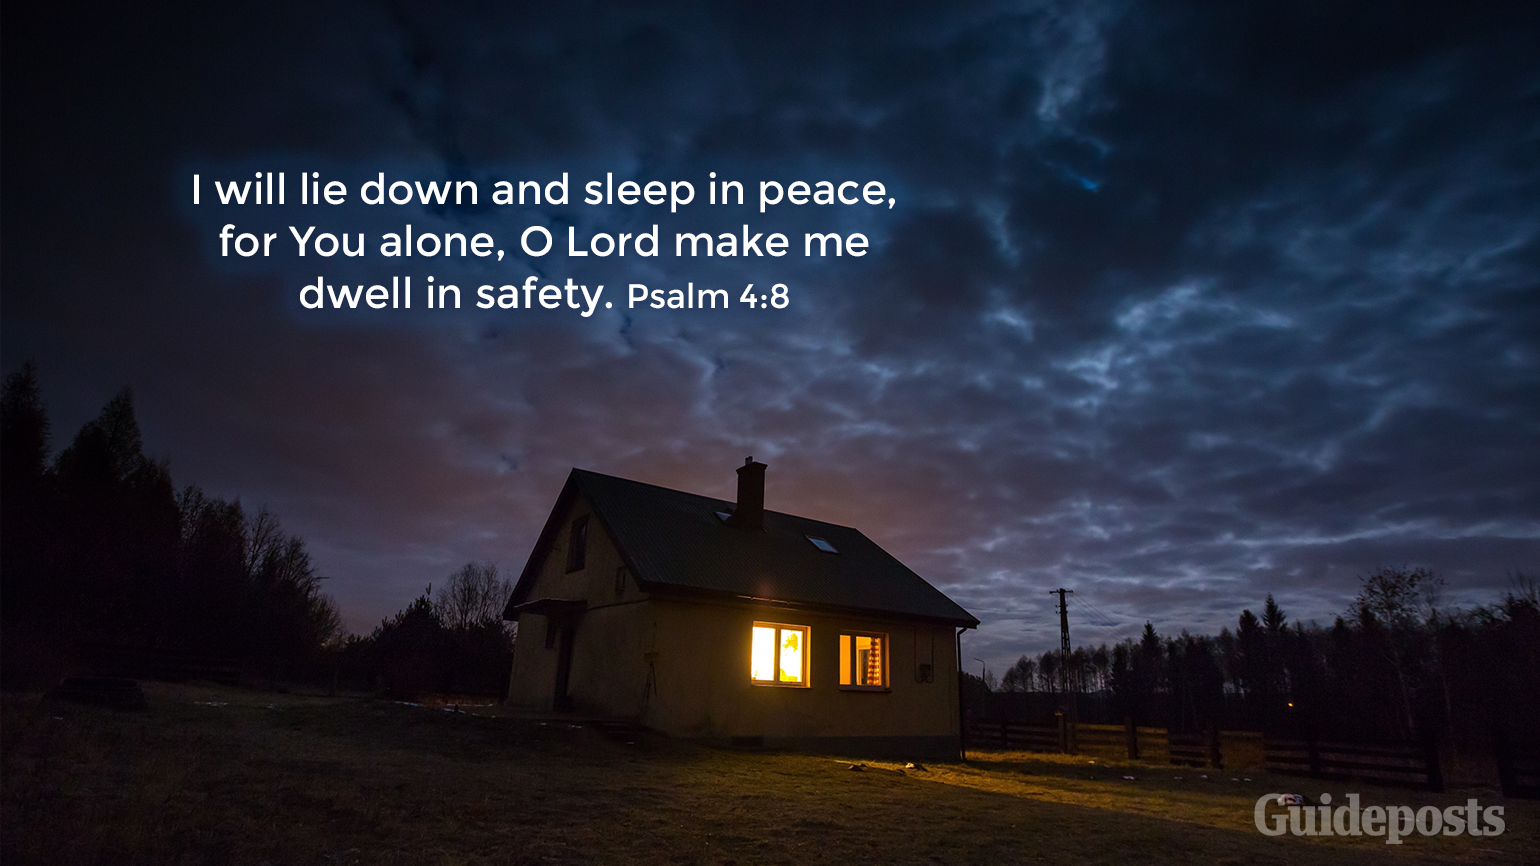 7 Bible Verses for a Good Night's Sleep "I will lie down and sleep in peace, for You alone, O Lord make me dwell in safety." Psalm 4:8 Faith Prayer Bible Resources